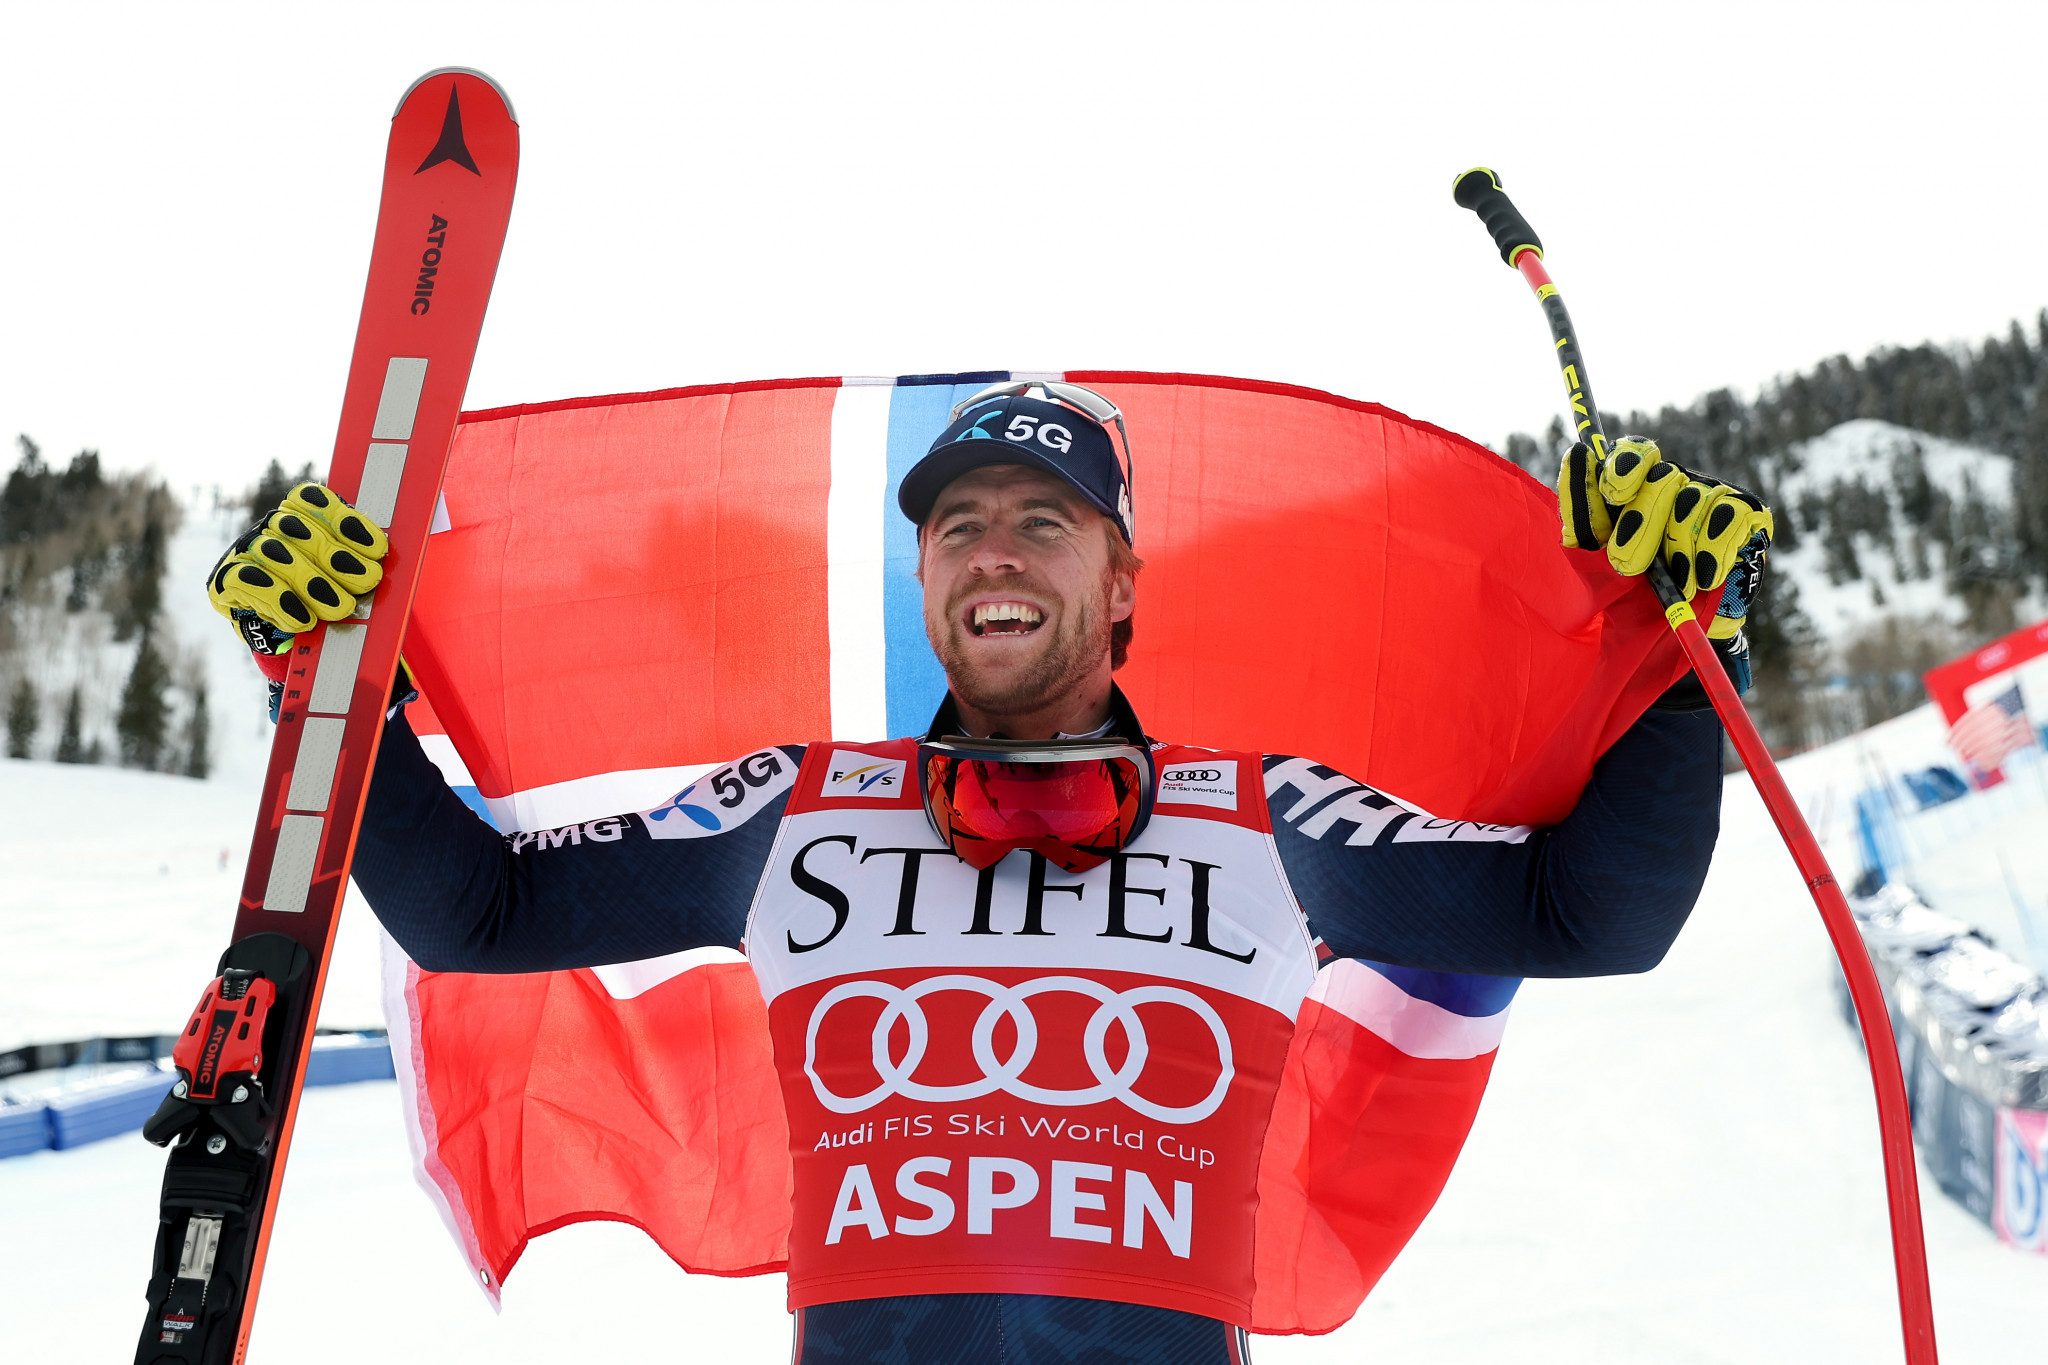 Kilde wins downhill gold to secure Crystal Globe at FIS Alpine Ski World Cup in Aspen 